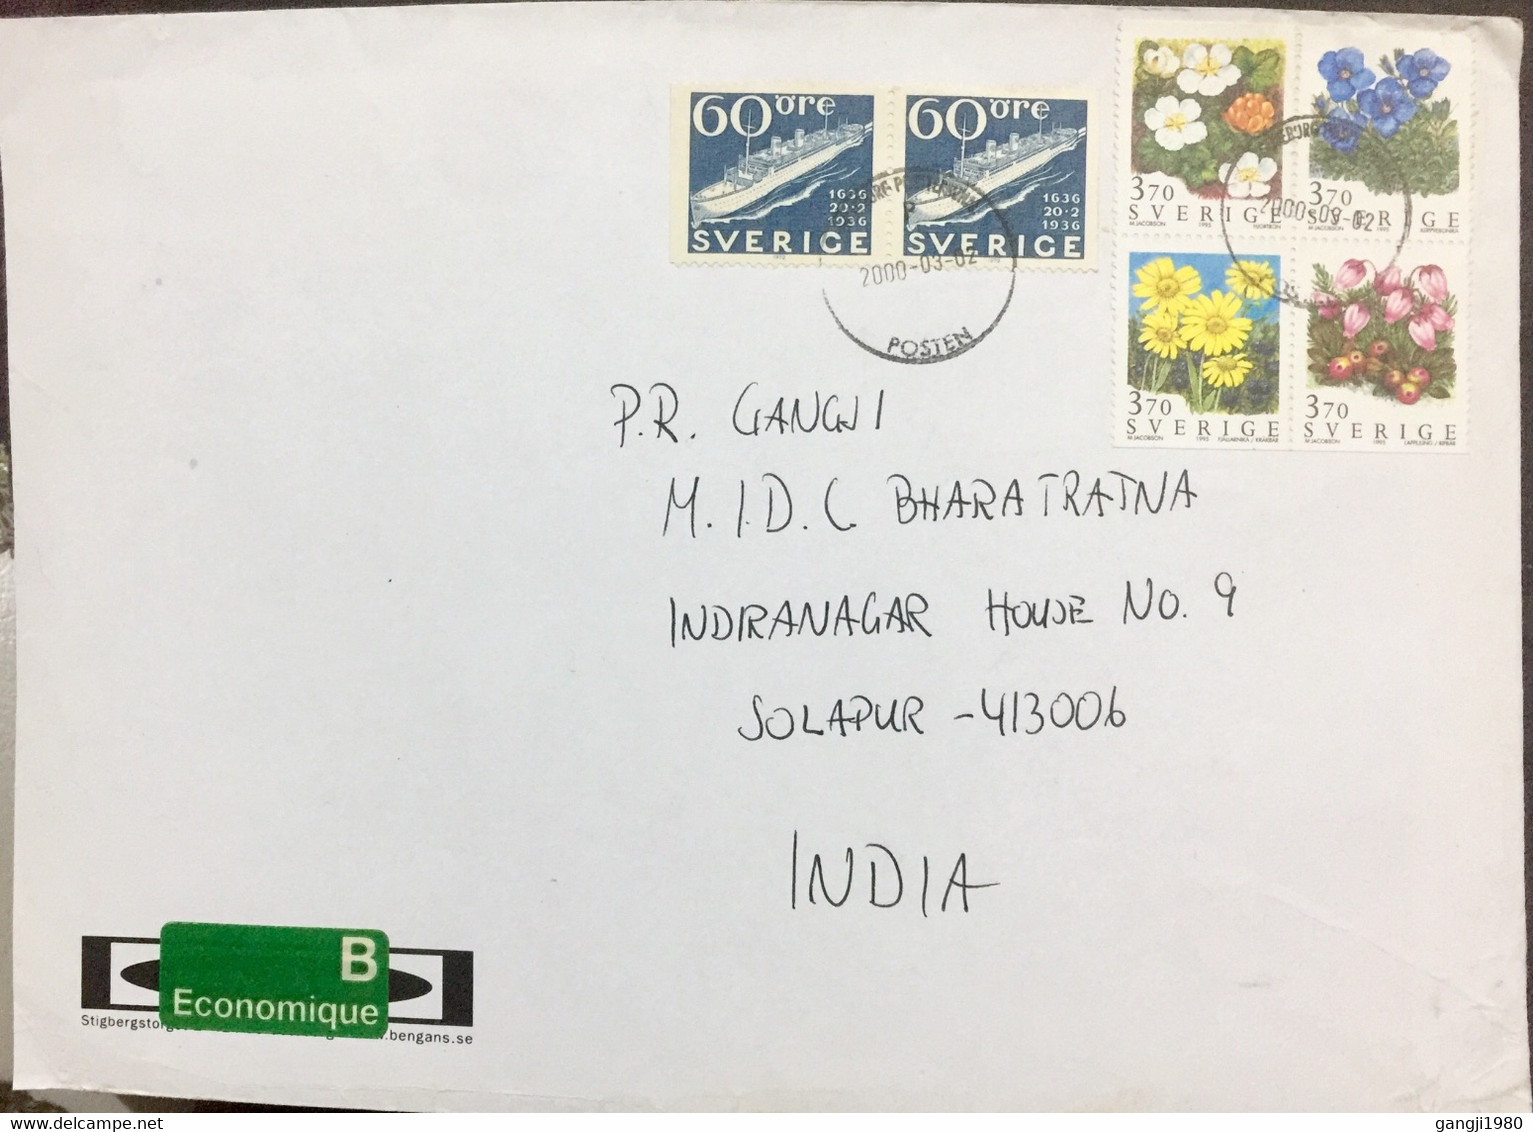 SWEDEN 2000, COVER VIGNETTE ECONOMIQUE GREEN LABEL USED TO INDIA,STAMPS 4 STAMPS FLOWERS BLOCK,SHIP PAIR - Cartas & Documentos